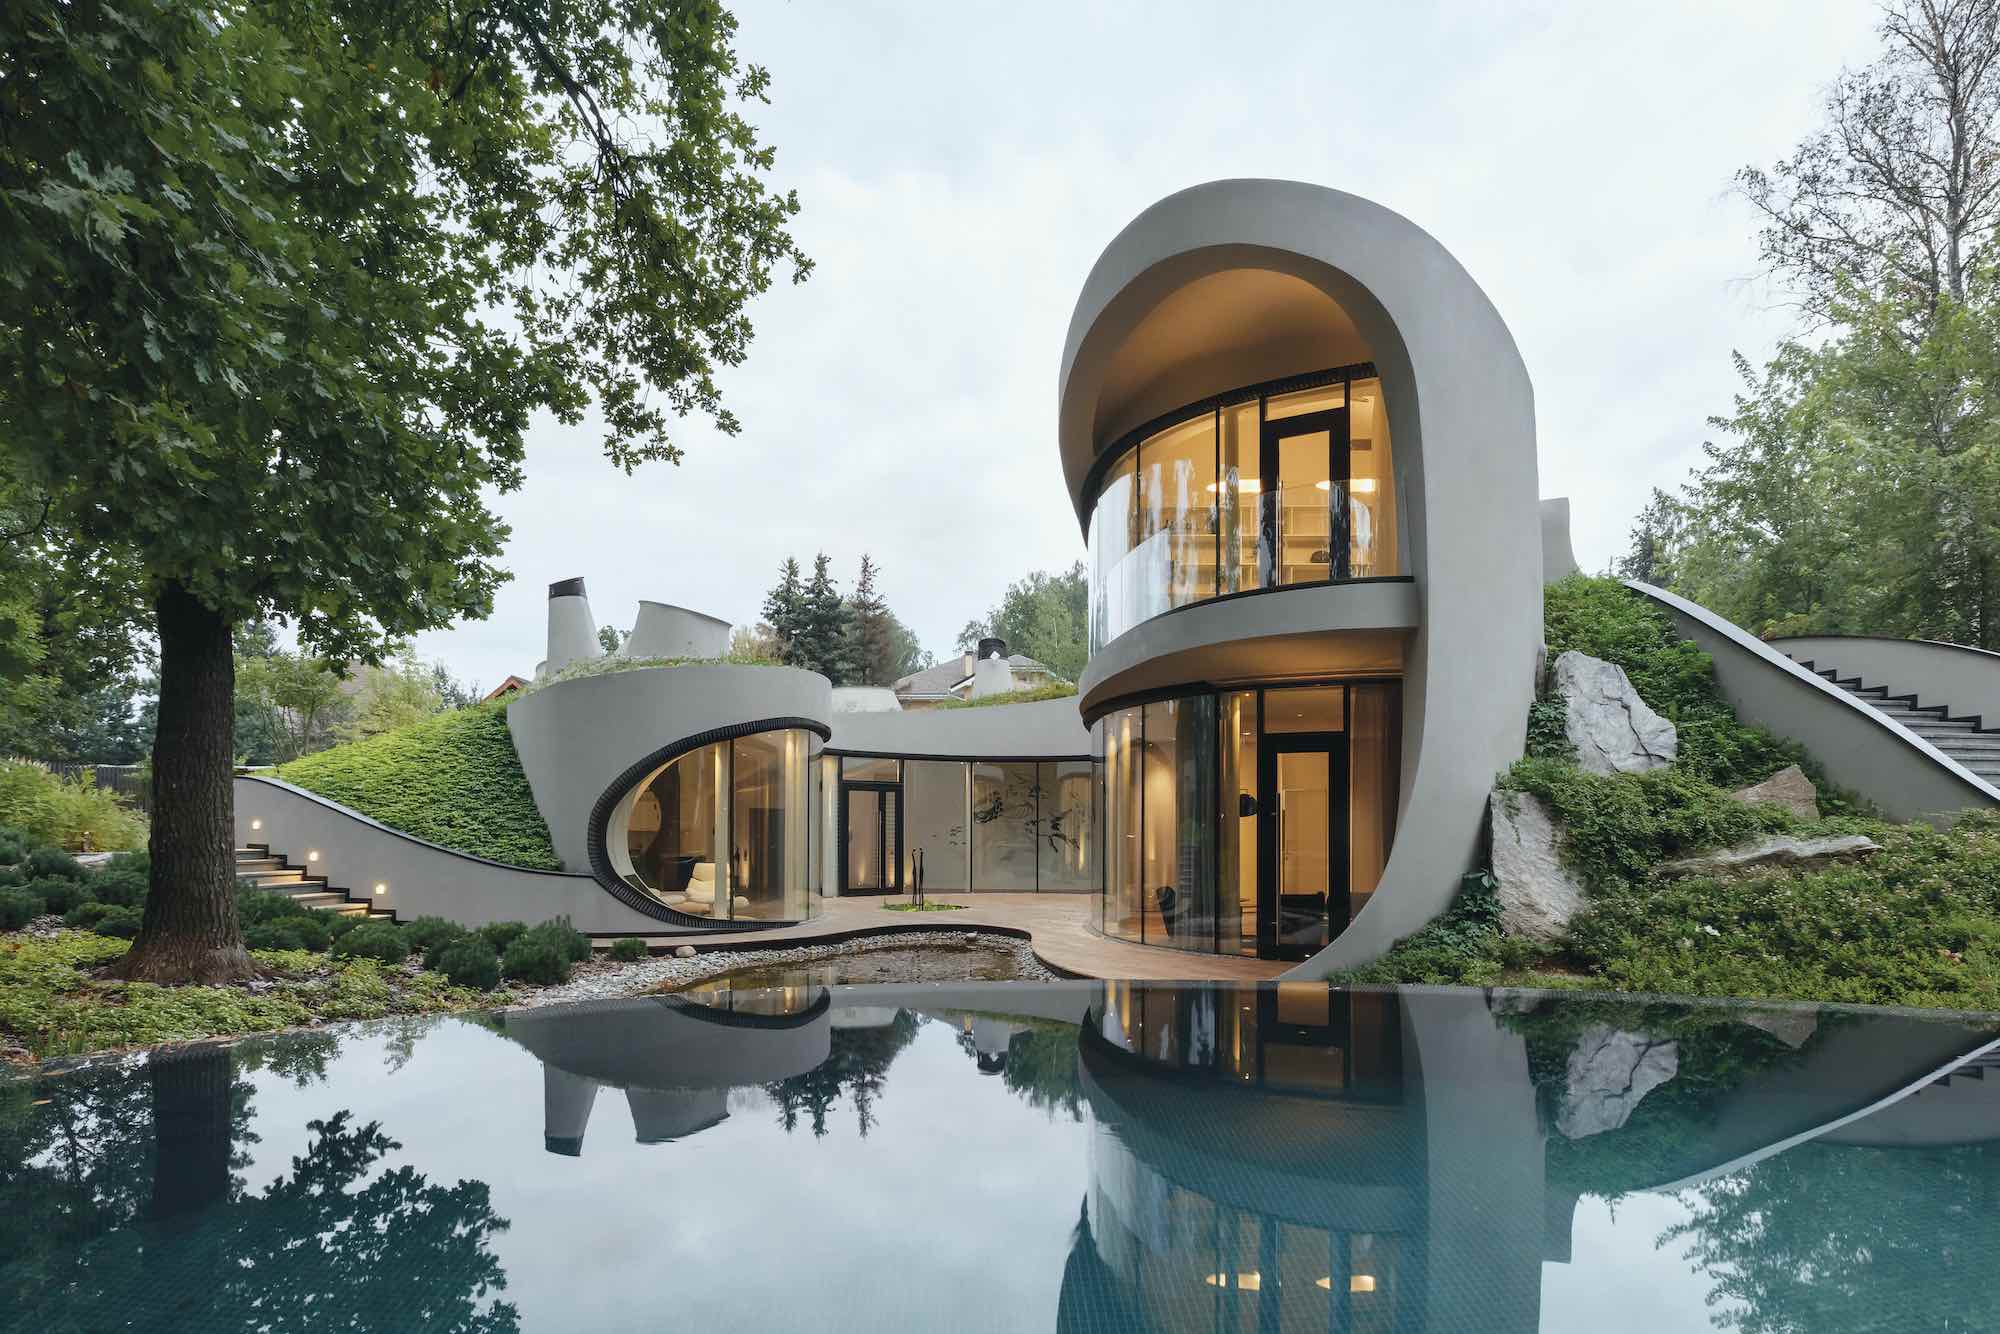 organic house amazing architect designed moscow architectural niko landscape firm completed recently based interior